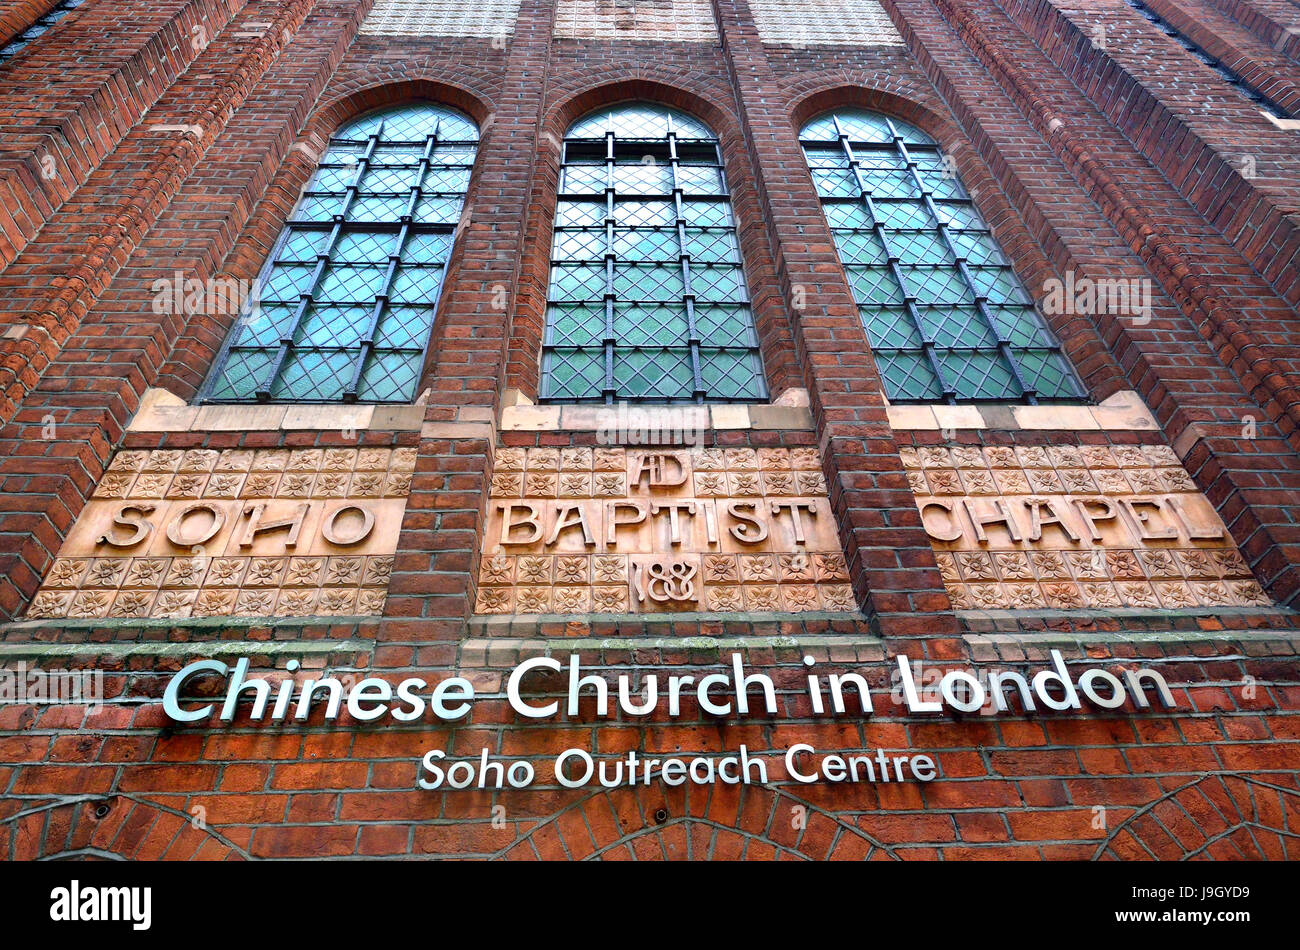 London, England, UK. Chinese Church in London / Soho Outreach Centre, 166A Shaftesbury Avenue. Providing Christian services for the Chinese community  Stock Photo